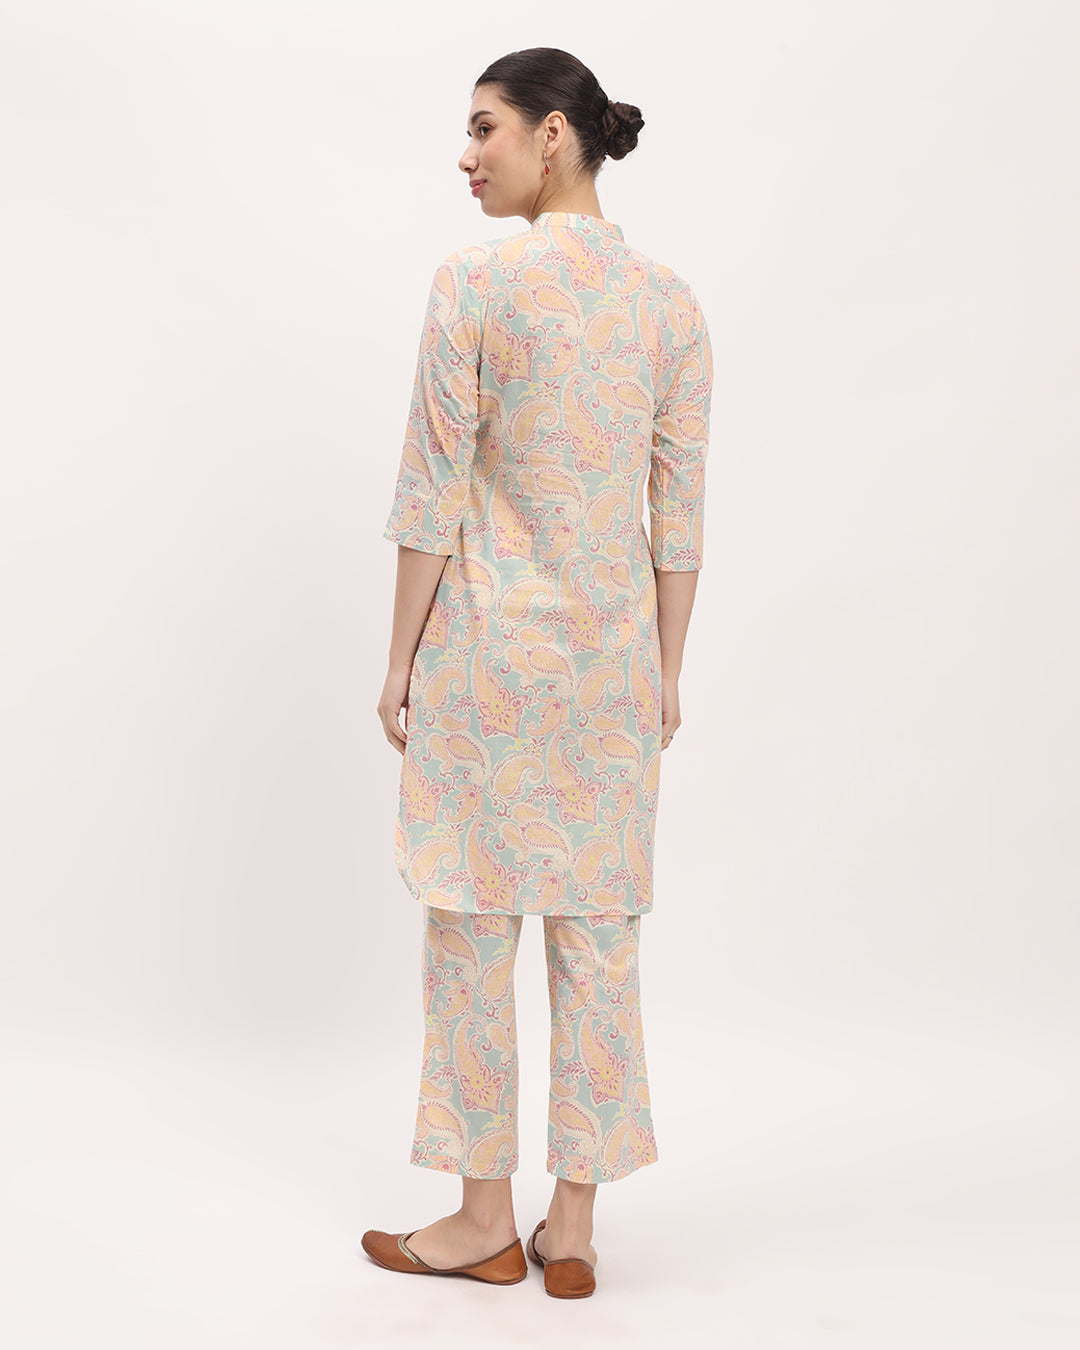 Combo: Yellow Chic Lines & Blue Tiffany Band Collar Neck Printed Kurta (Without Bottoms)